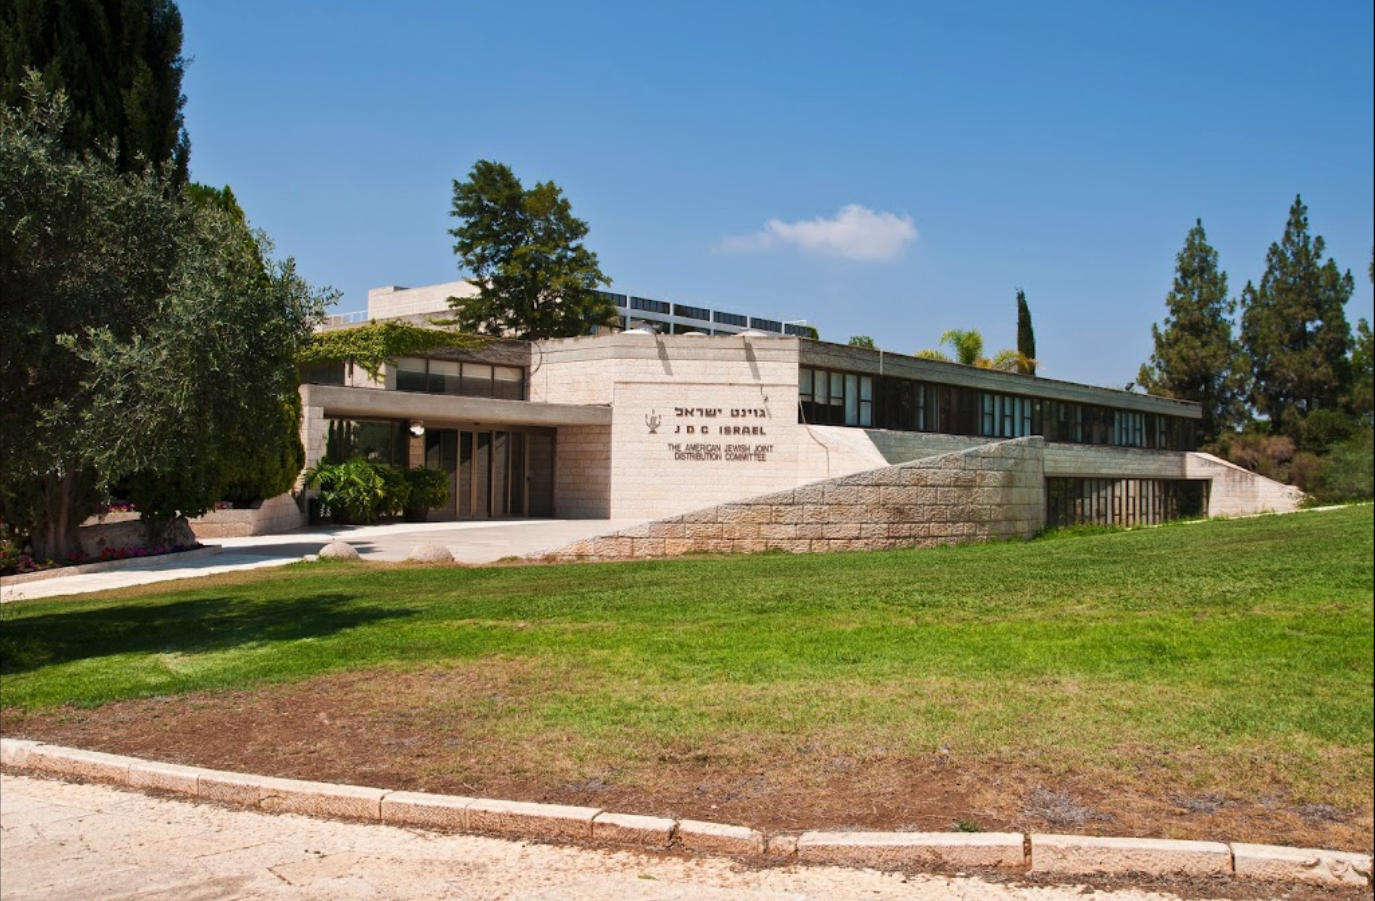 The headquarters of The Joint in Jerusalem